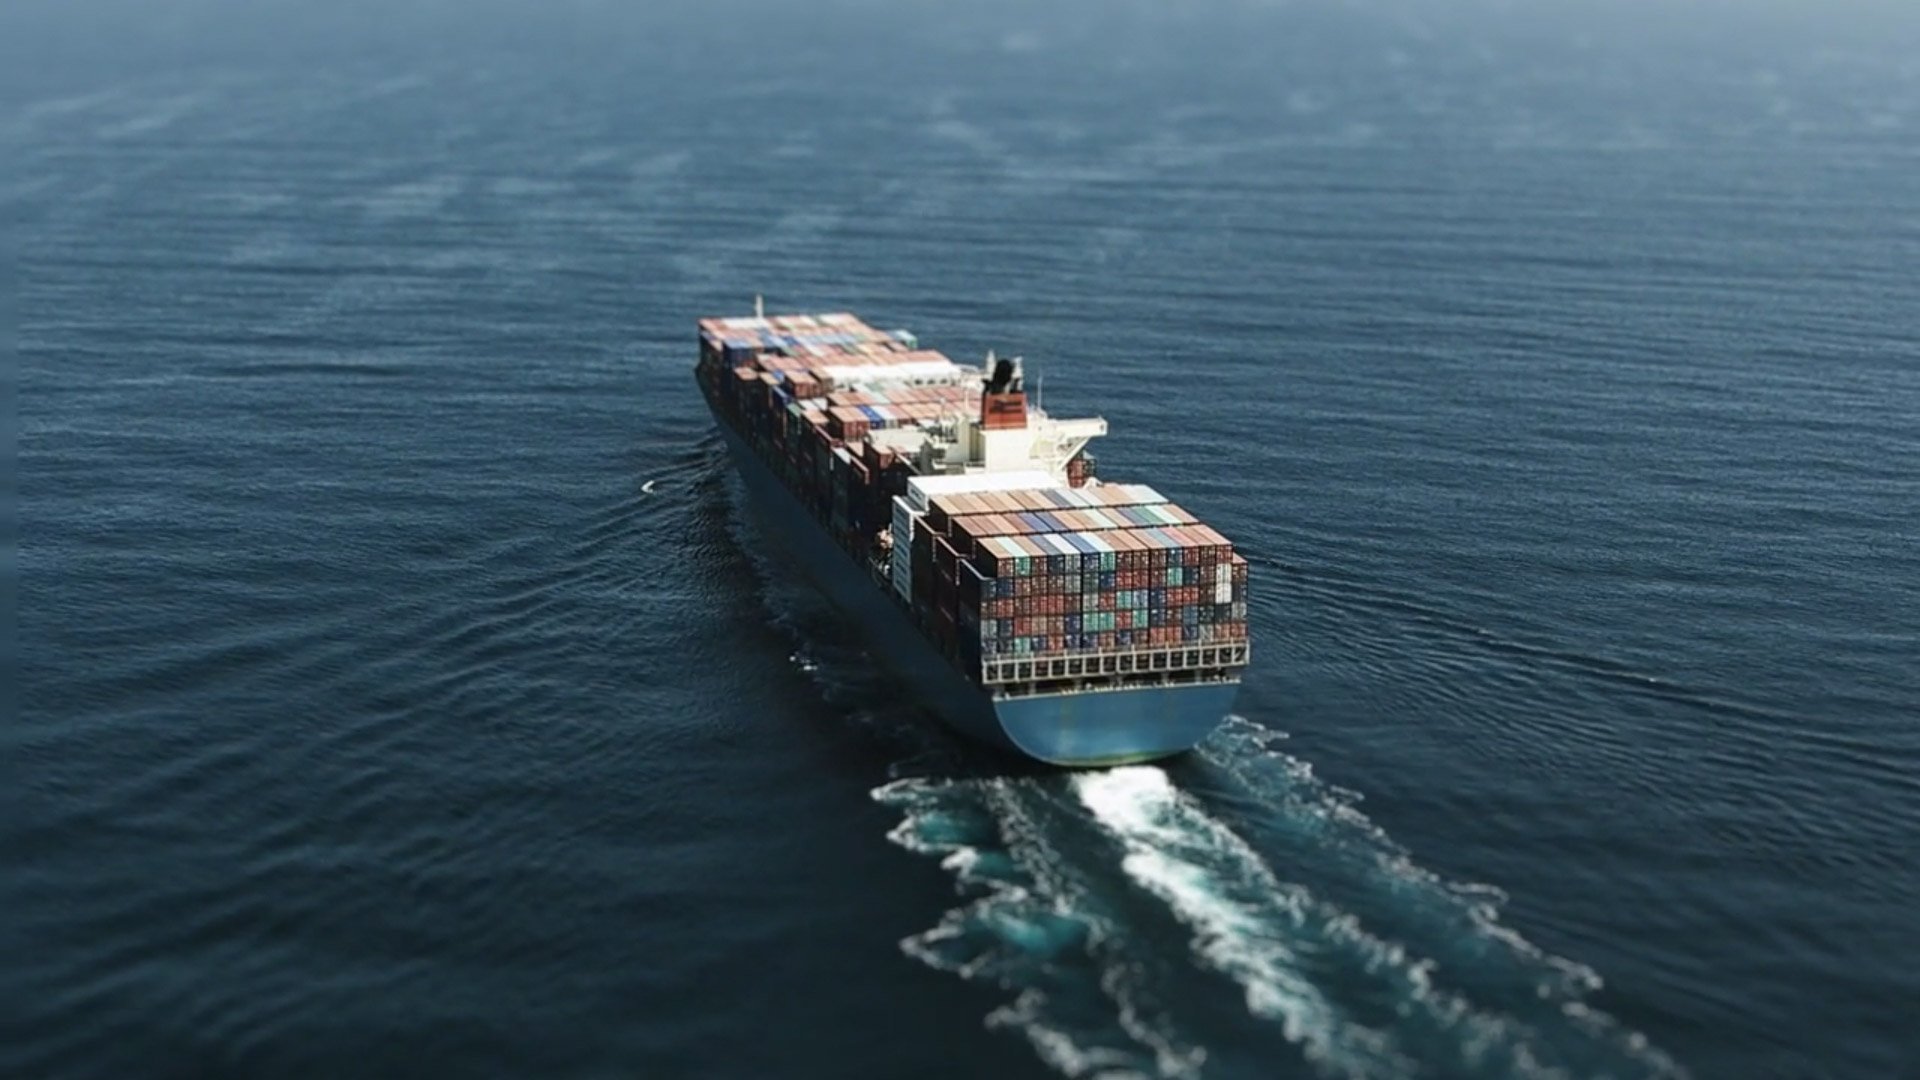 Cargo Shipping Outlook 2021: Container Transport on Rise